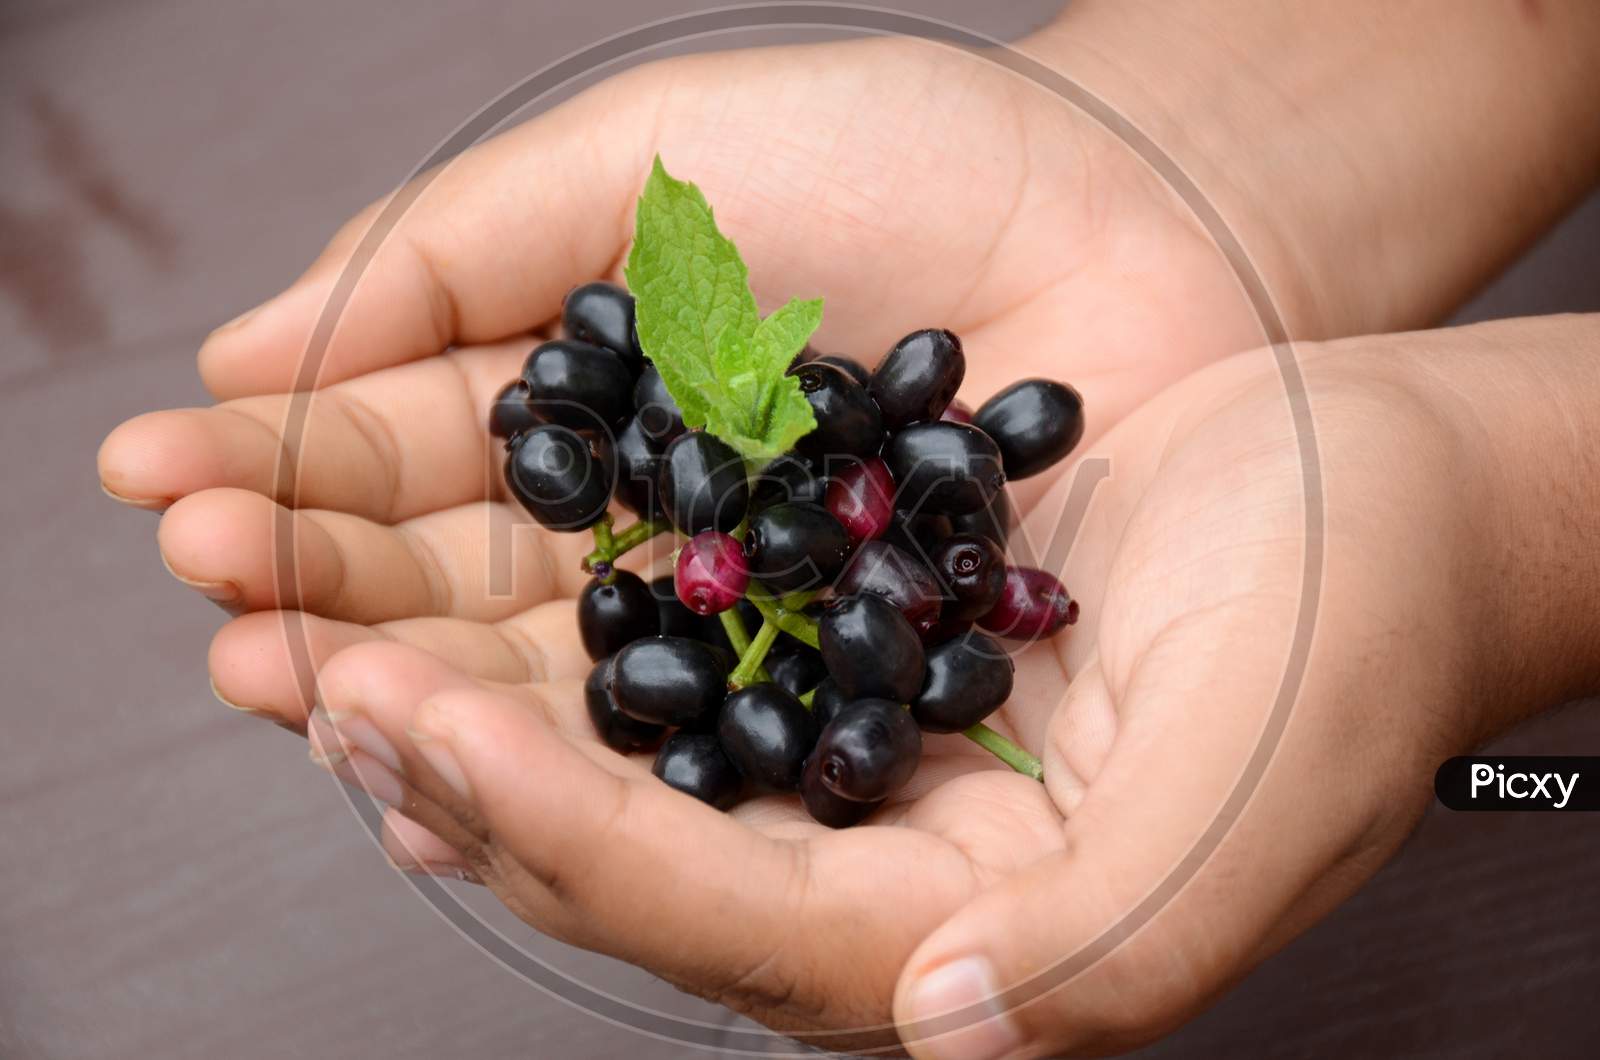 Closeup Blackberry Fruit With Green Mint Hold Hand Over Out Of Focus Brown Background.